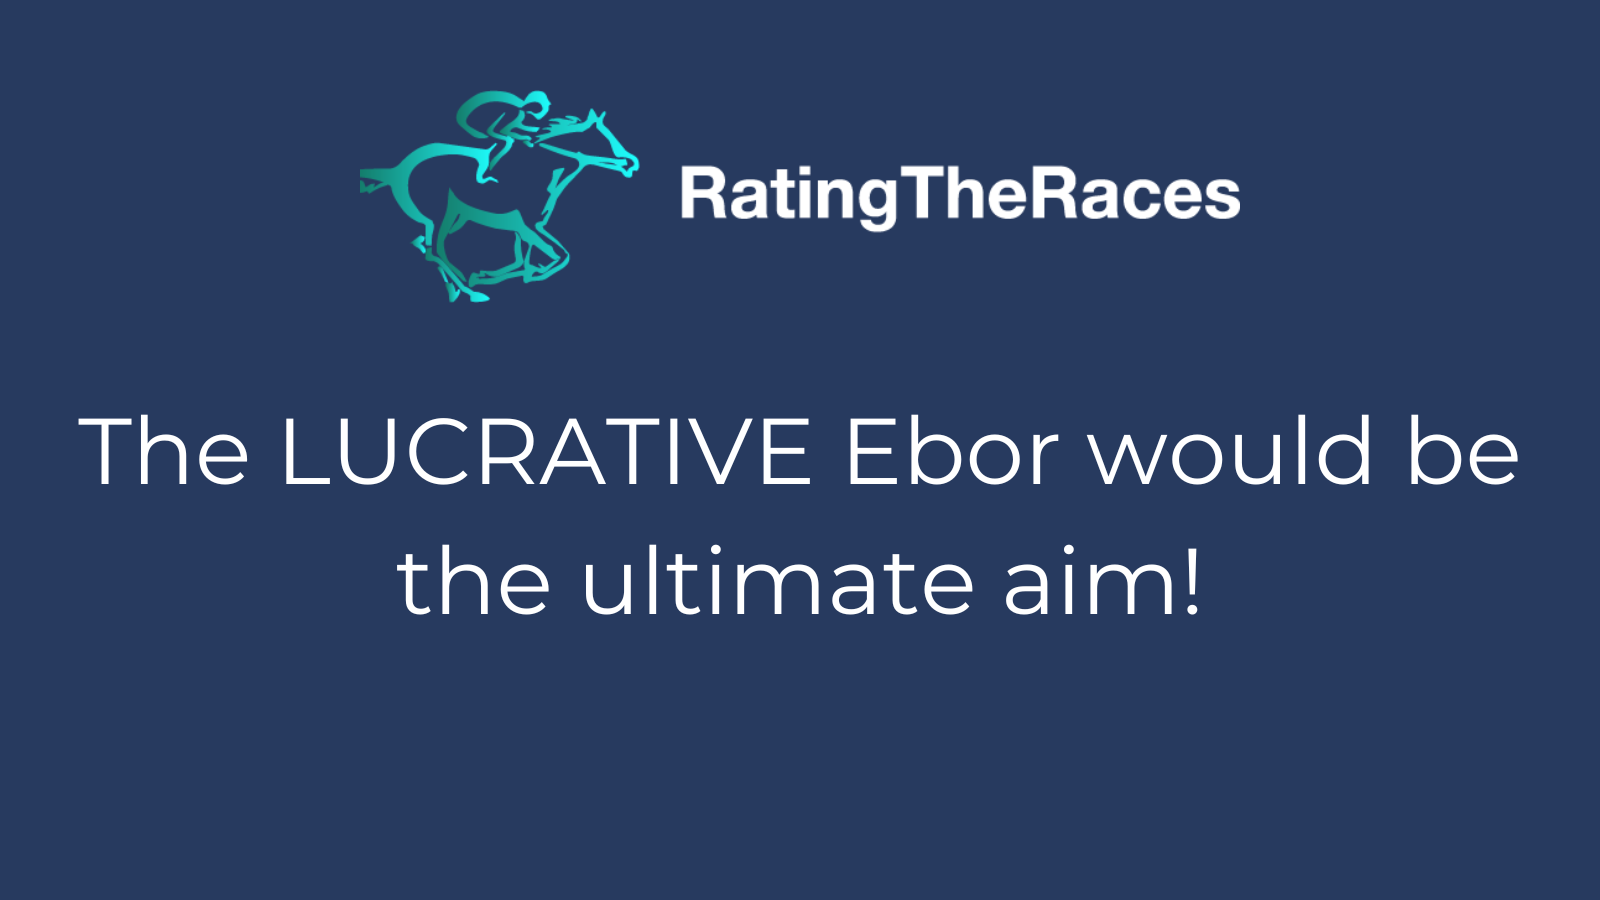 The Lucrative Ebor would be the long term plan